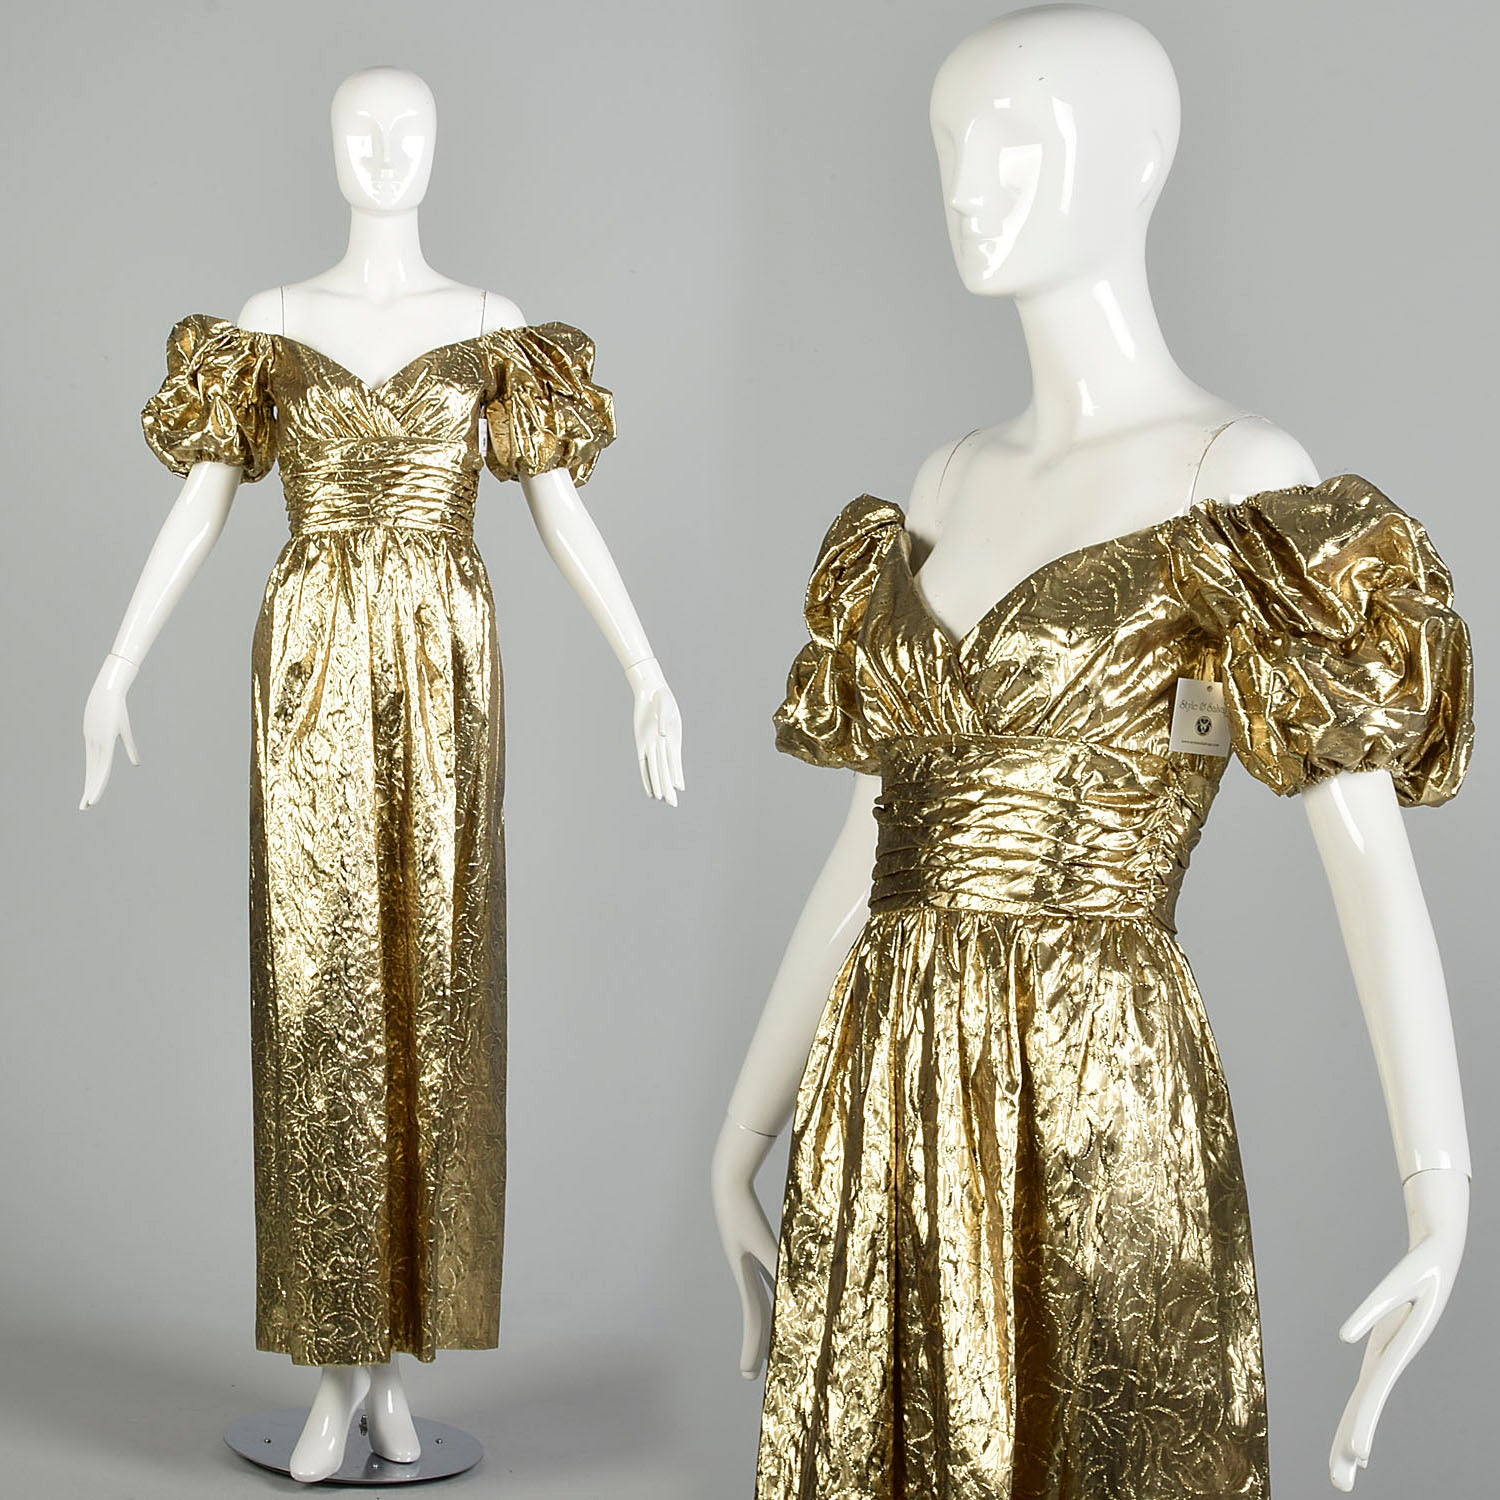 XS 1980s Mike Benet Gold Prom Dress Lamé Evening Gown Metallic Formal